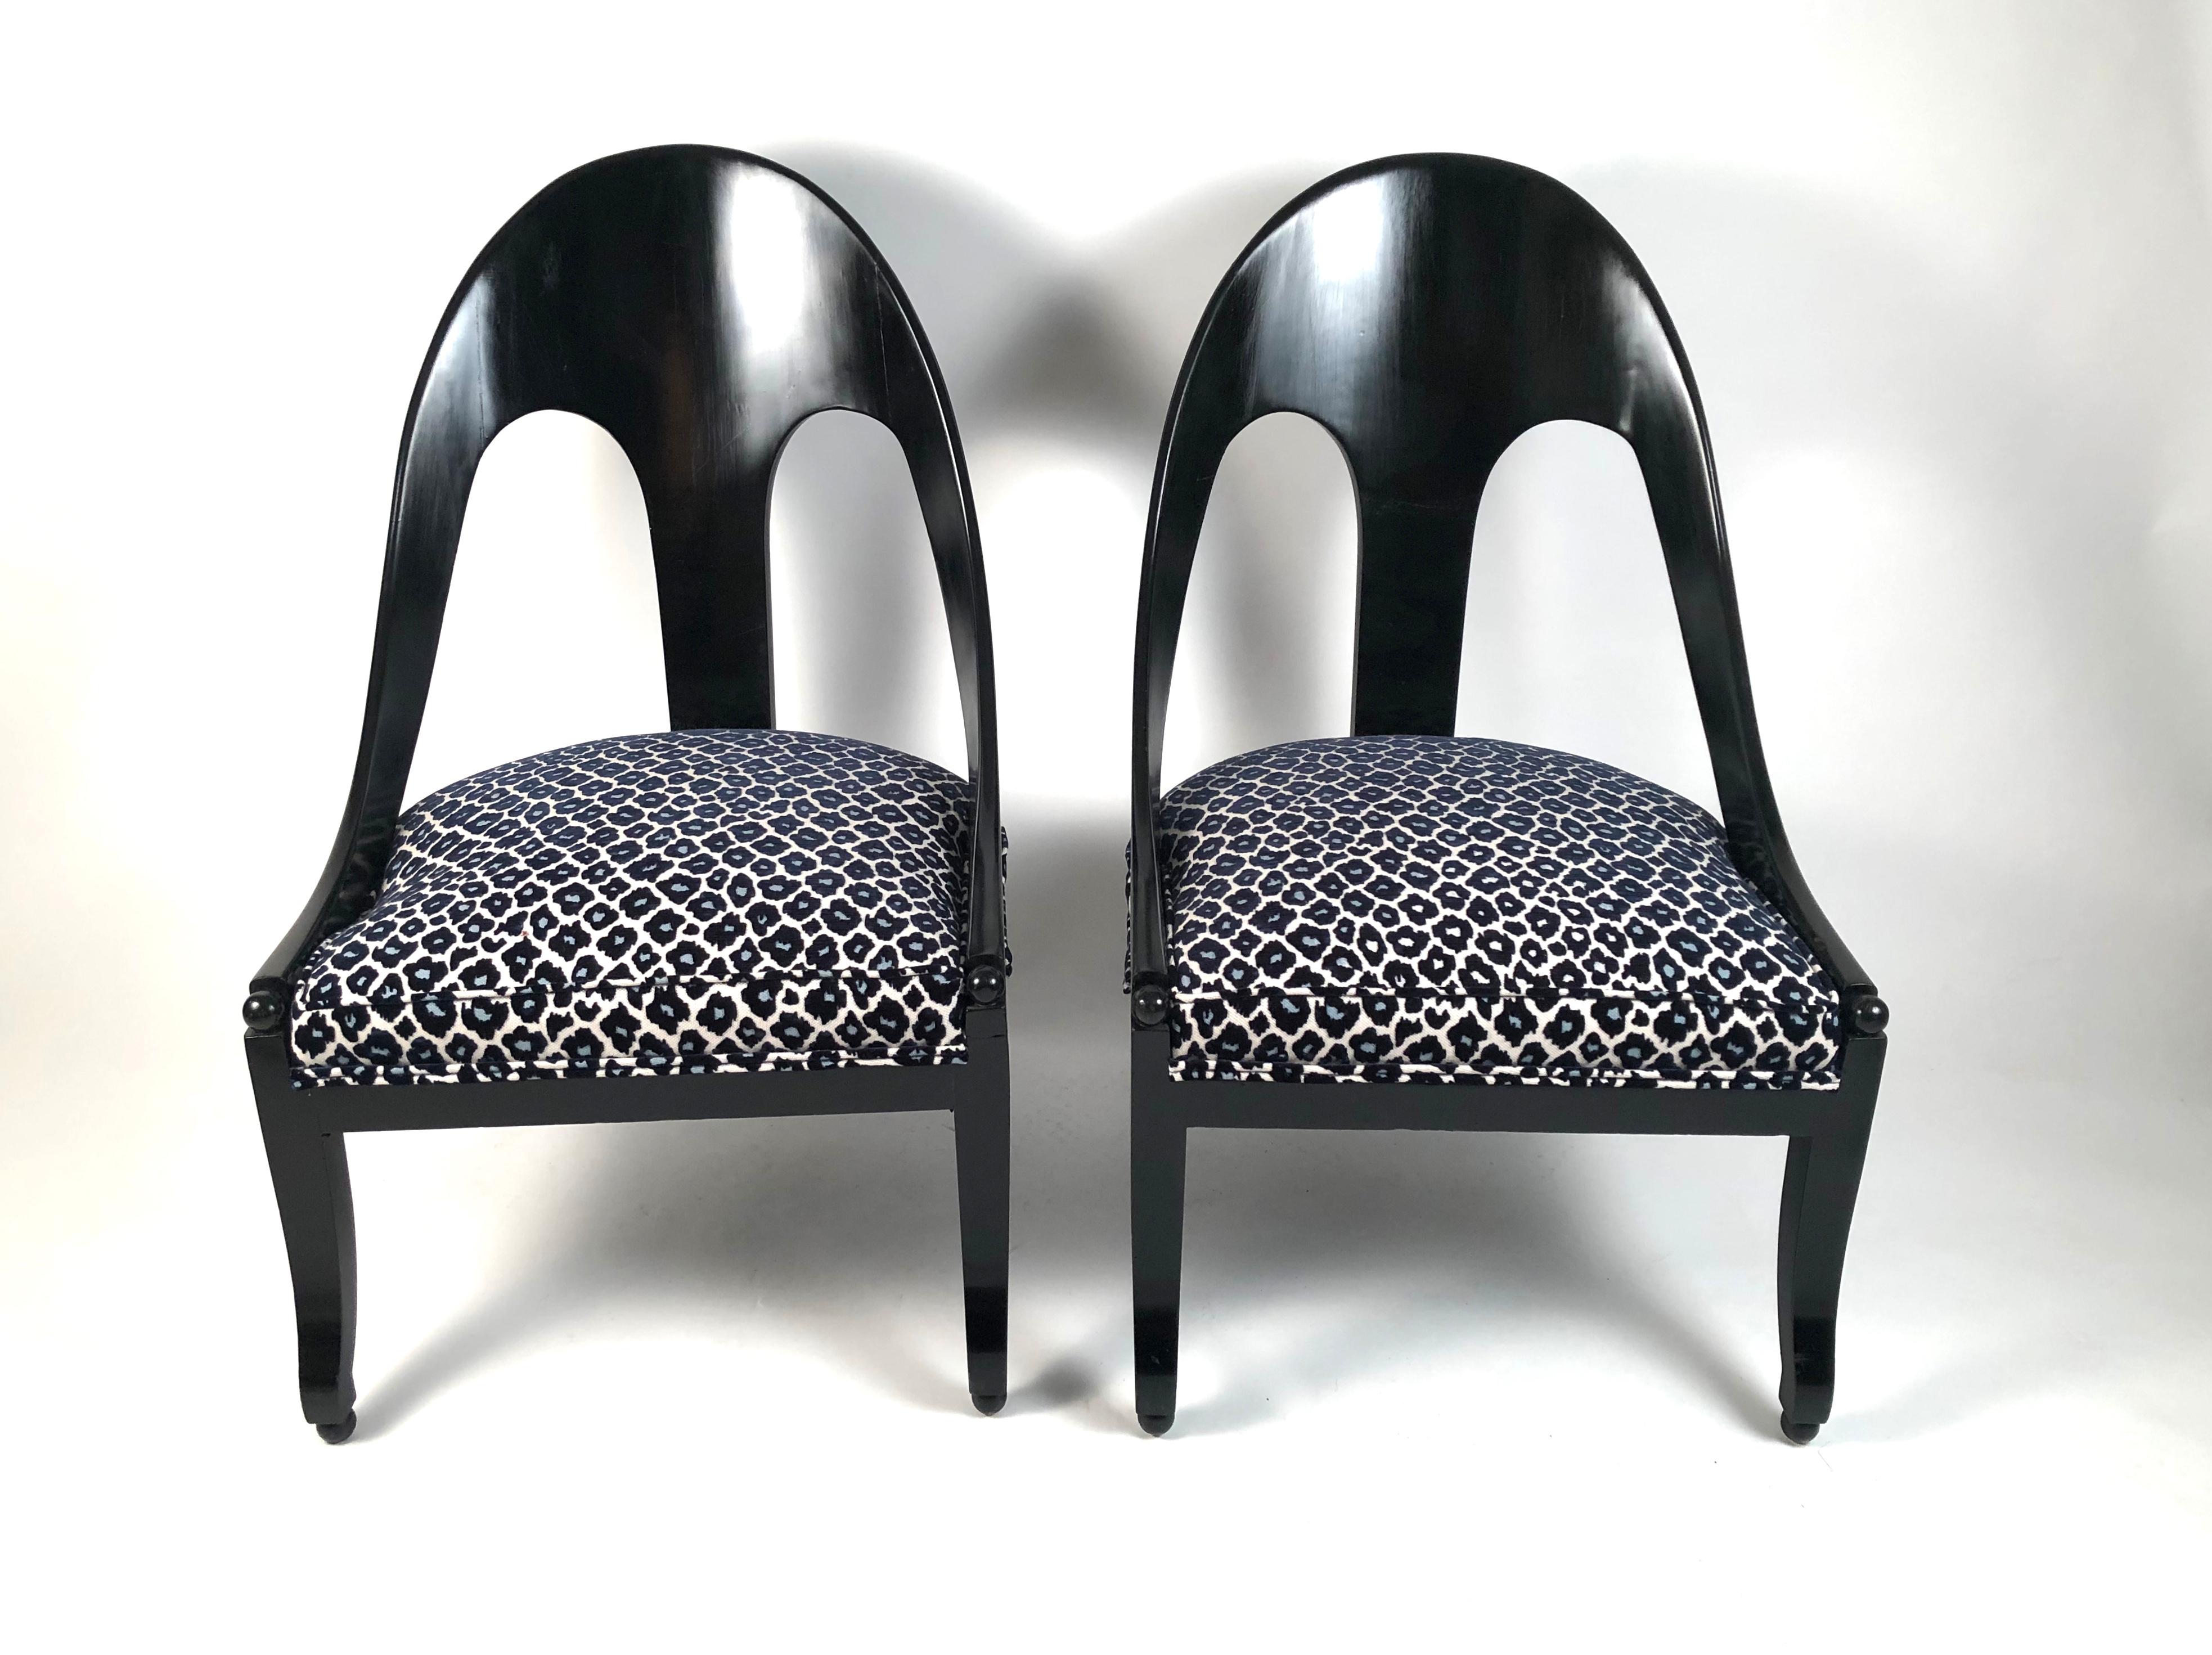 A pair of stylish and comfortable Regency style ebonized black wood spoon back chairs with newly upholstered seats in a high quality cut velvet blue and black leopard print. The sculptural curved back with central back splat is over a generously